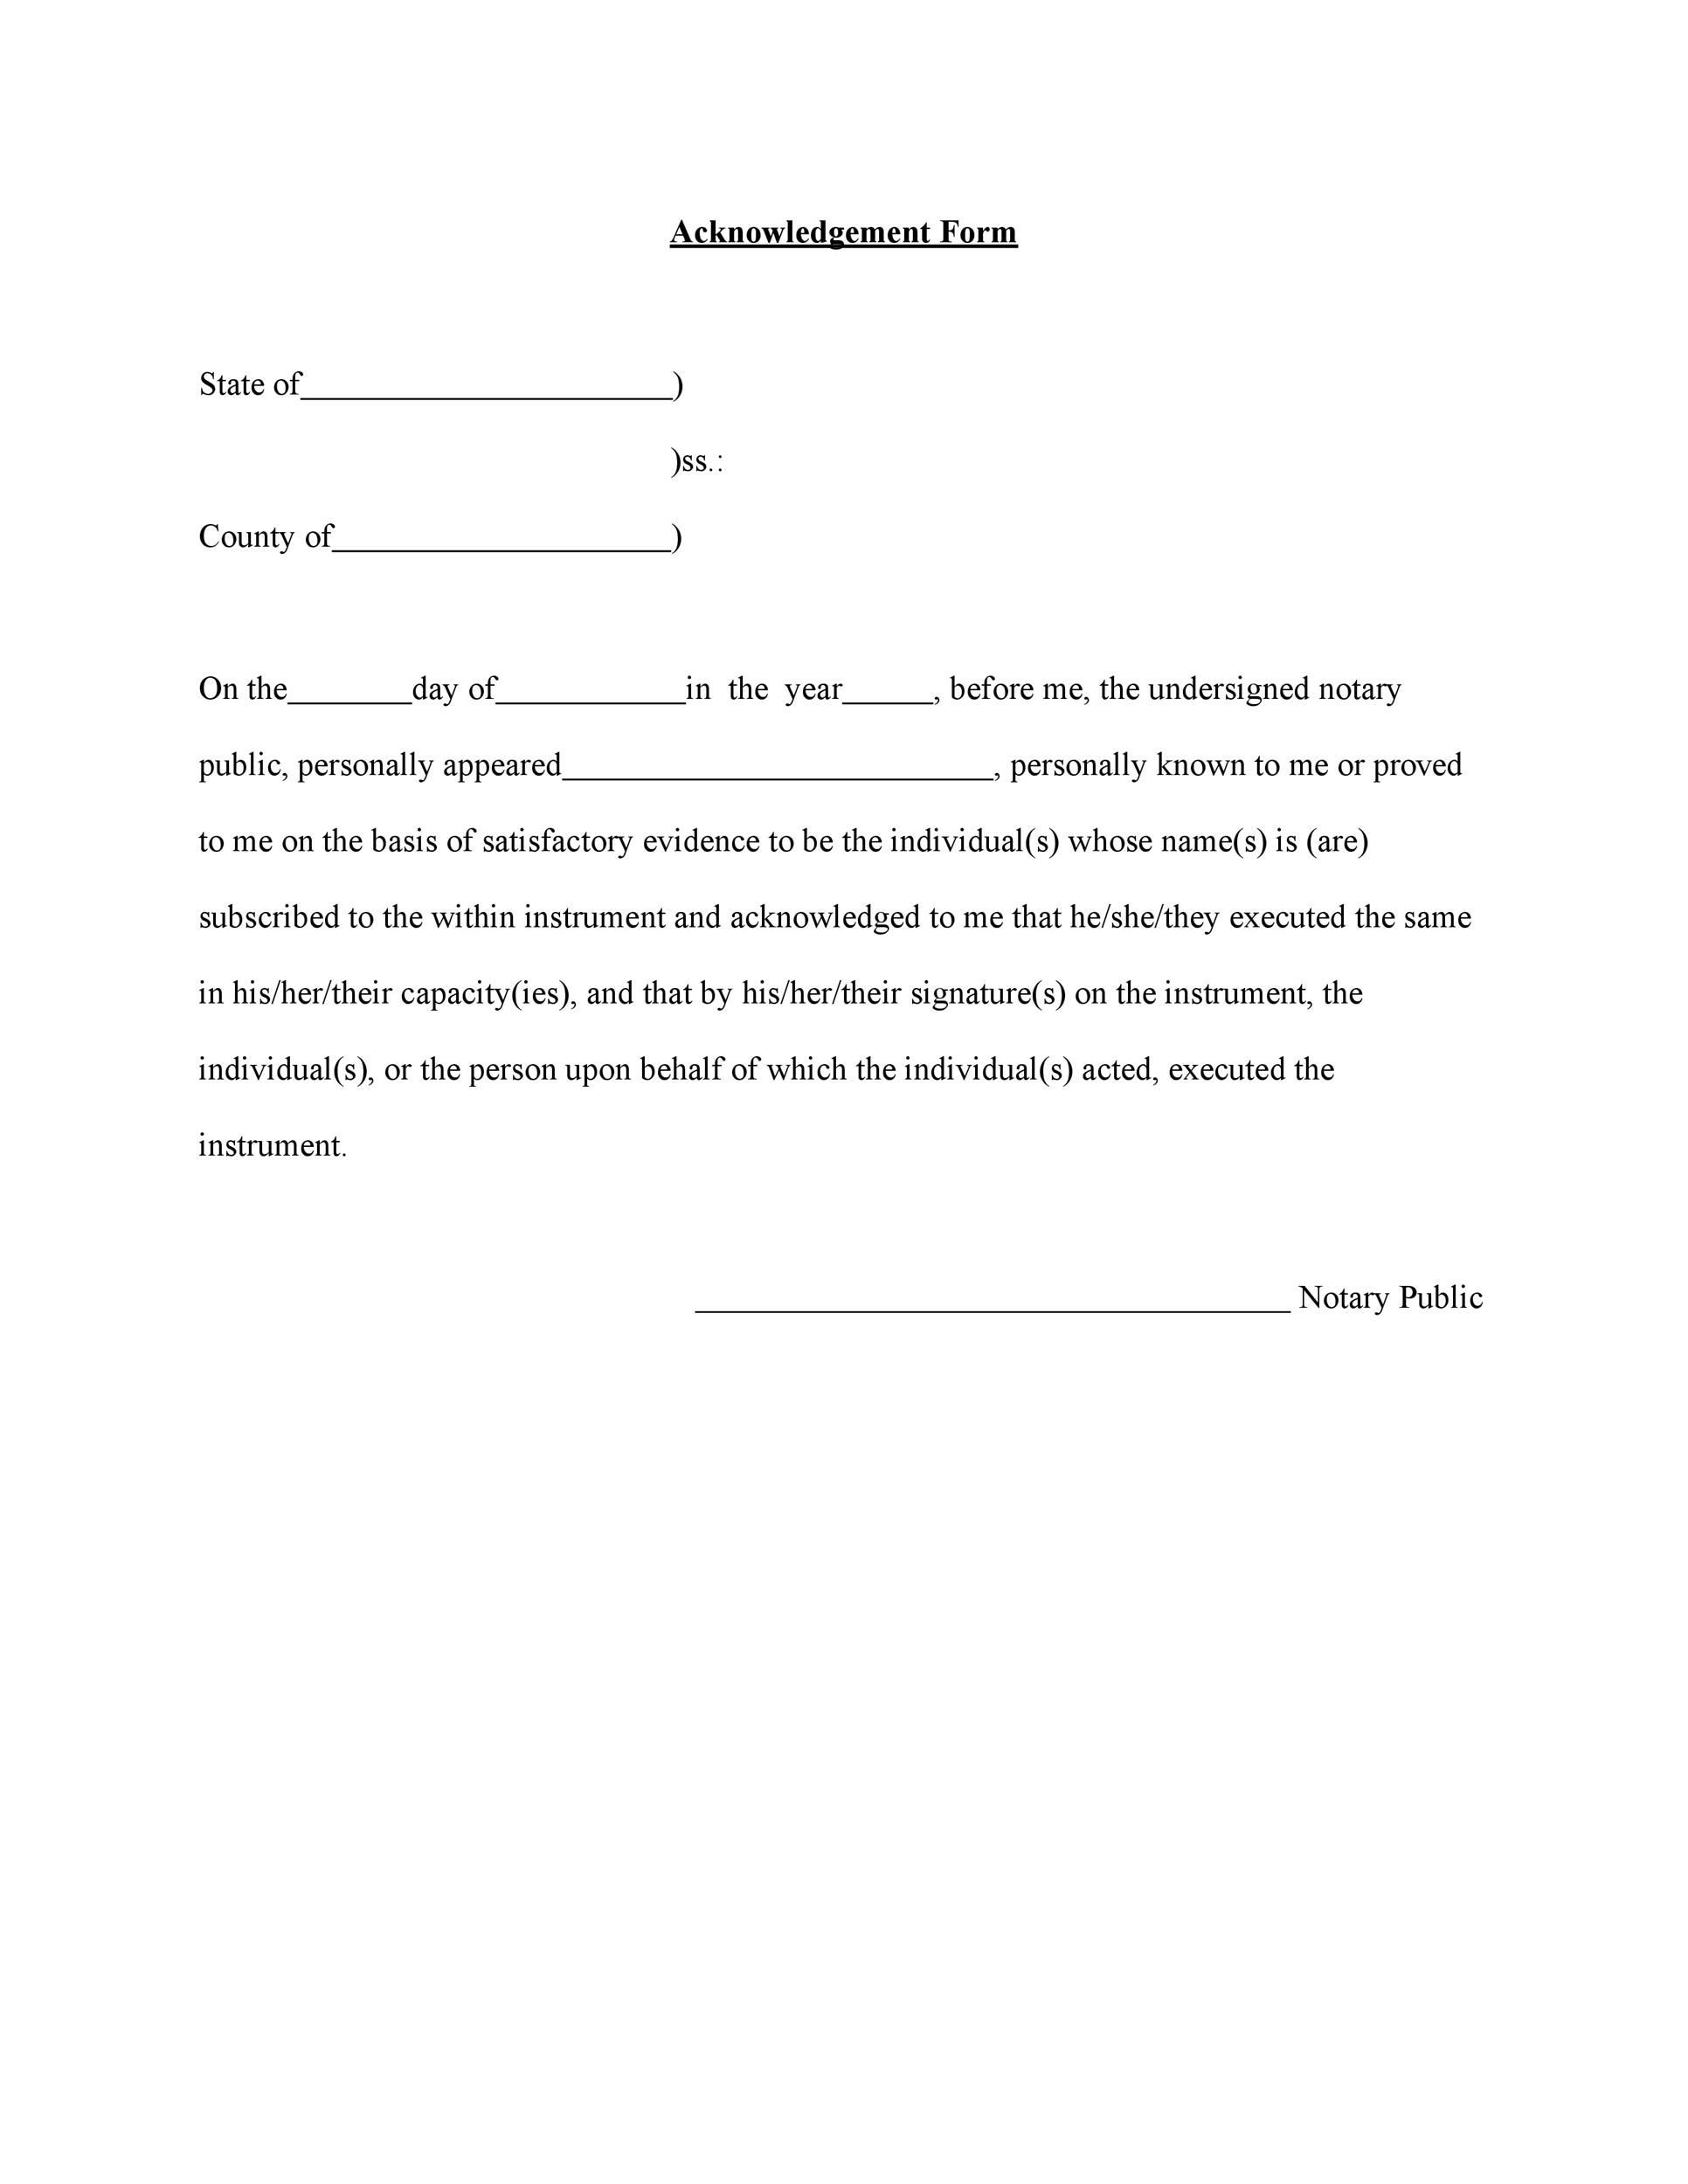 printable-blank-notary-form-for-business-partnership-printable-forms